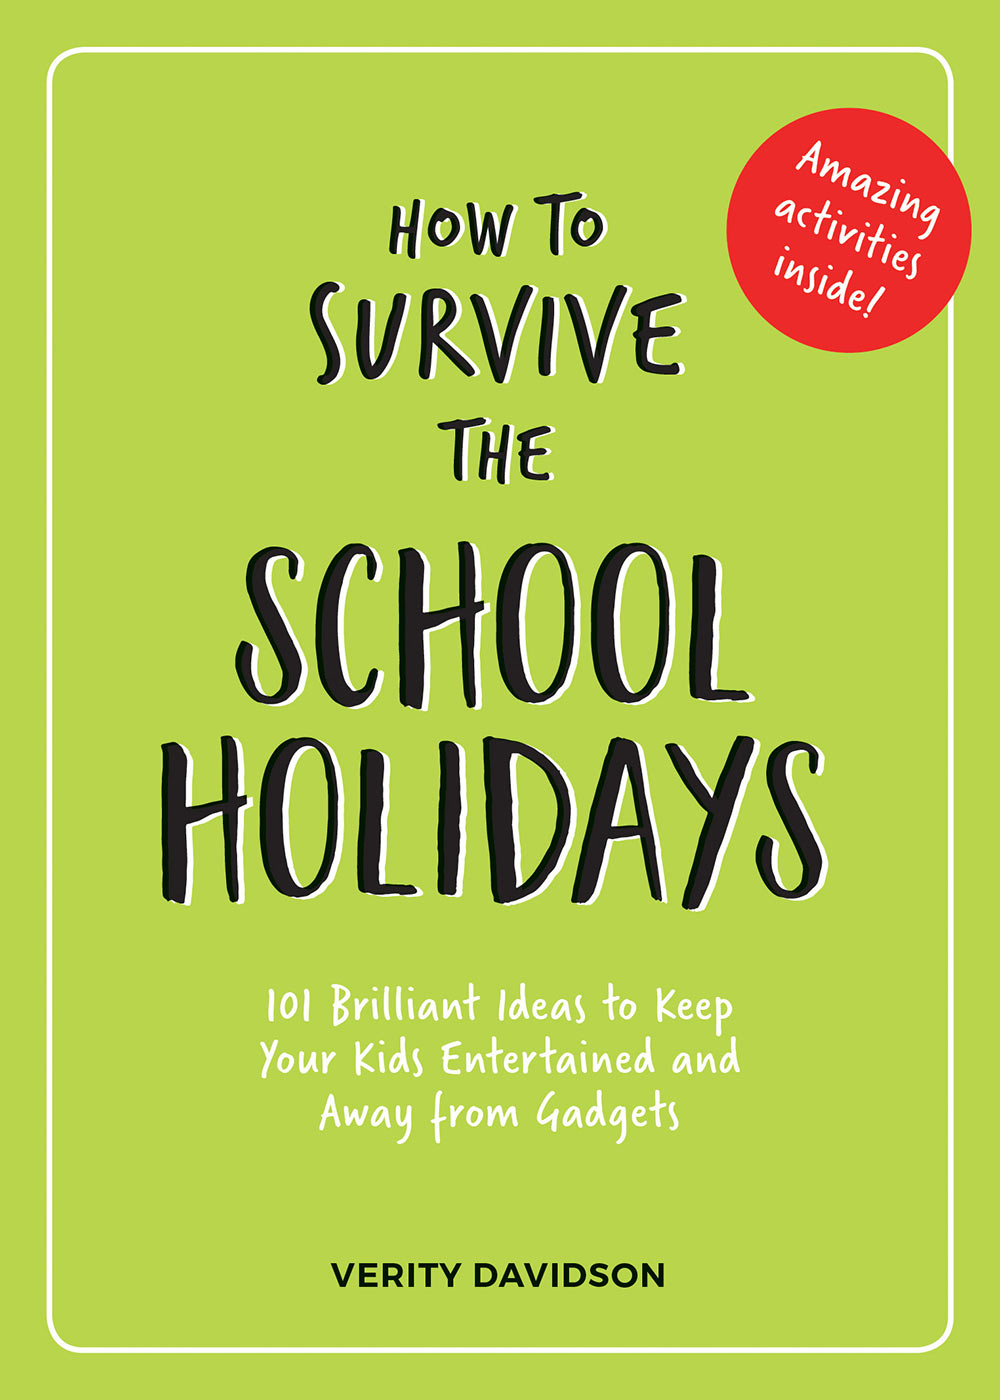 HOW TO SURVIVE THE SCHOOL HOLIDAYS Copyright Summersdale Publishers Ltd 2019 - photo 1